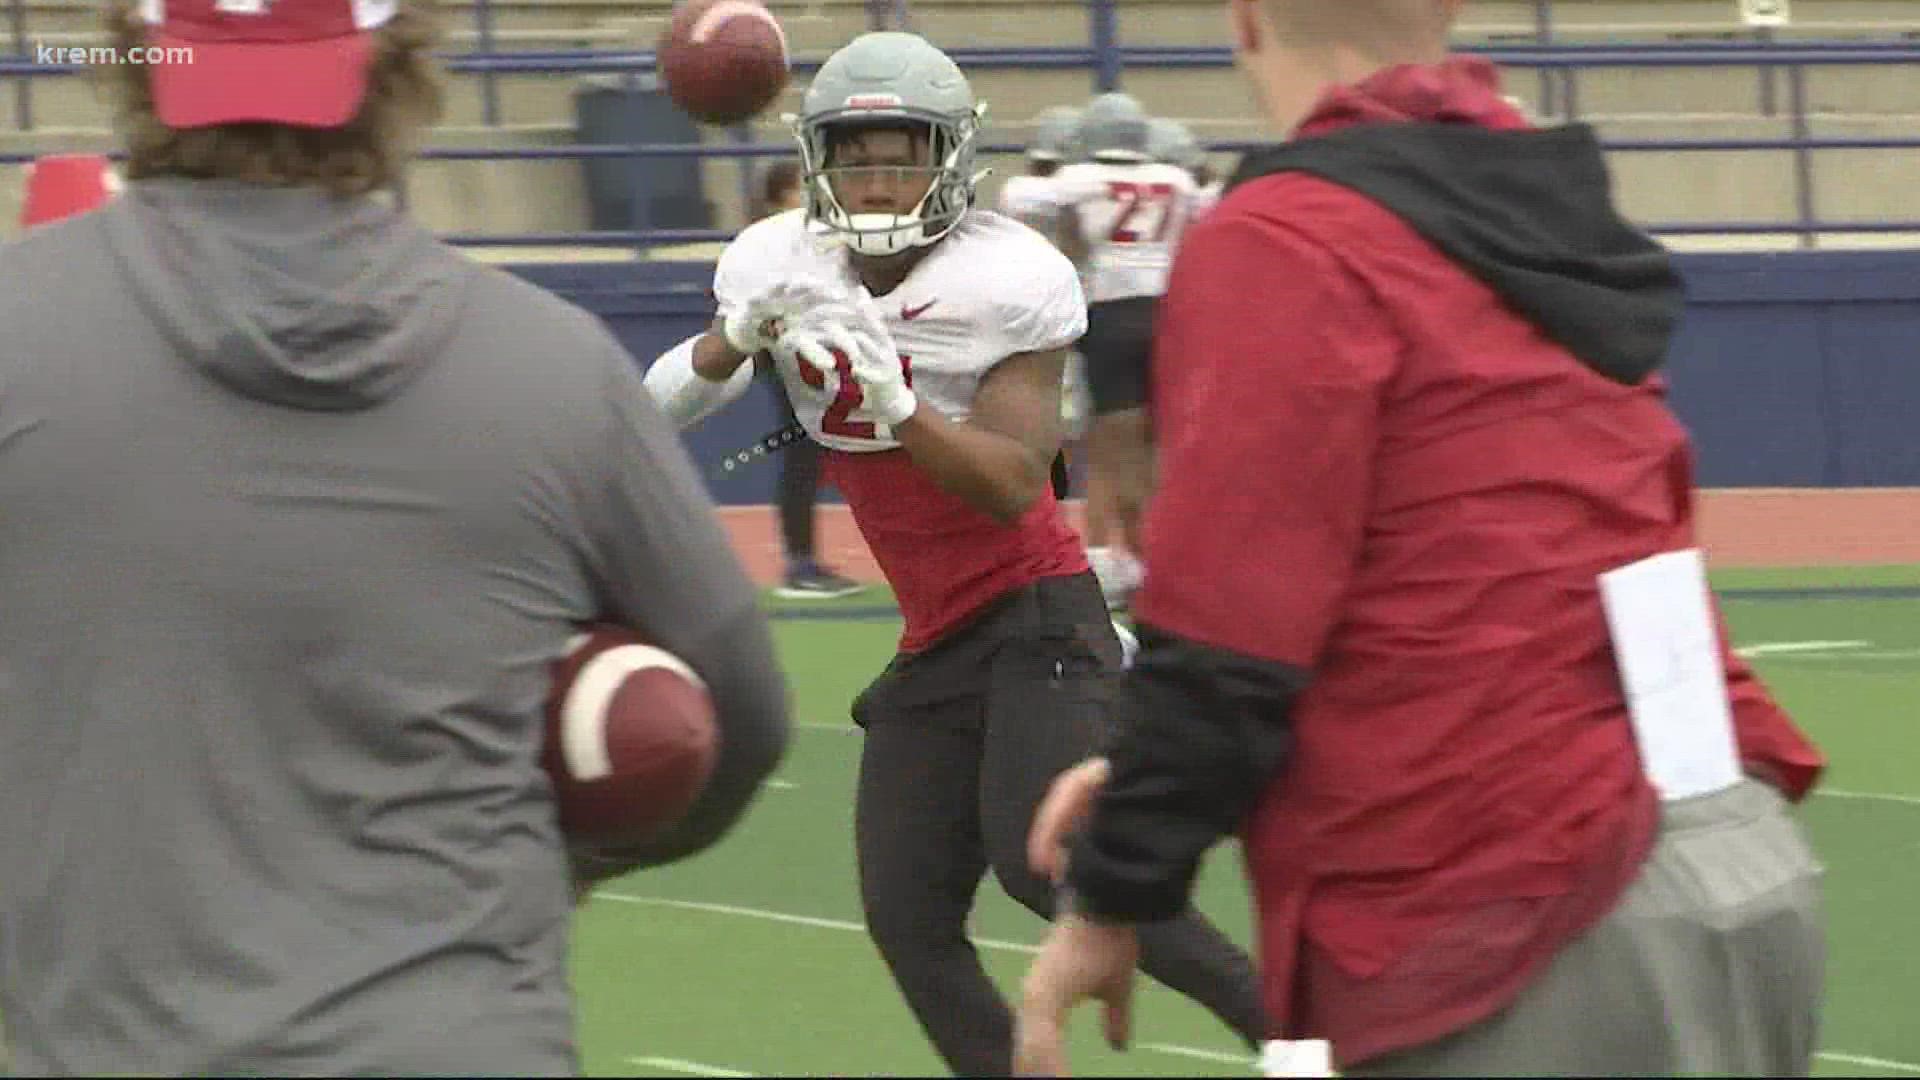 The WSU Cougars will take on the CMU Chippewas on KREM 2 at 9 a.m. on New Year's Eve.